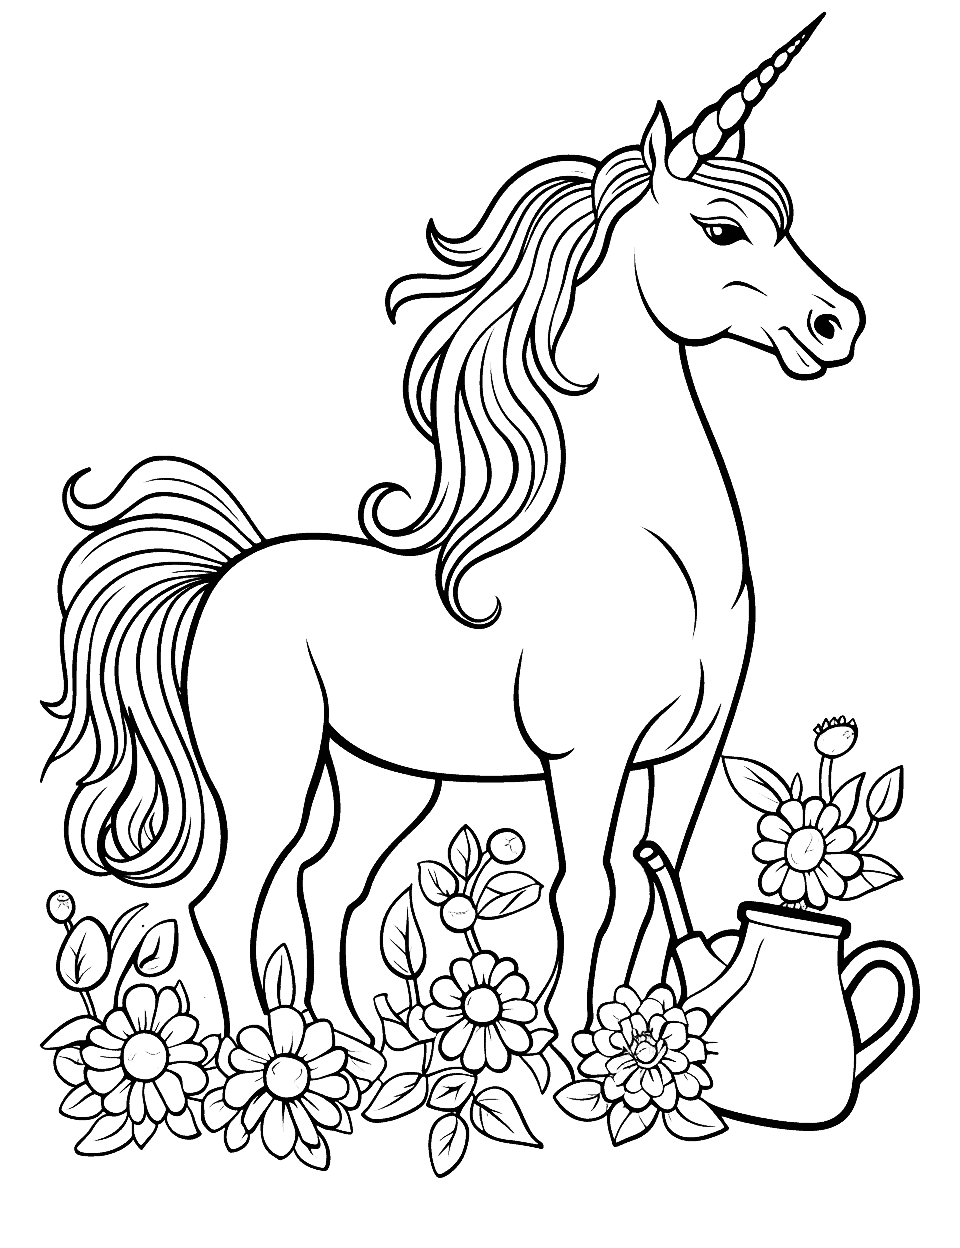 Unicorn Watering the Garden Coloring Page - A unicorn watering a flower garden with a variety of flowers and a vintage watering can.